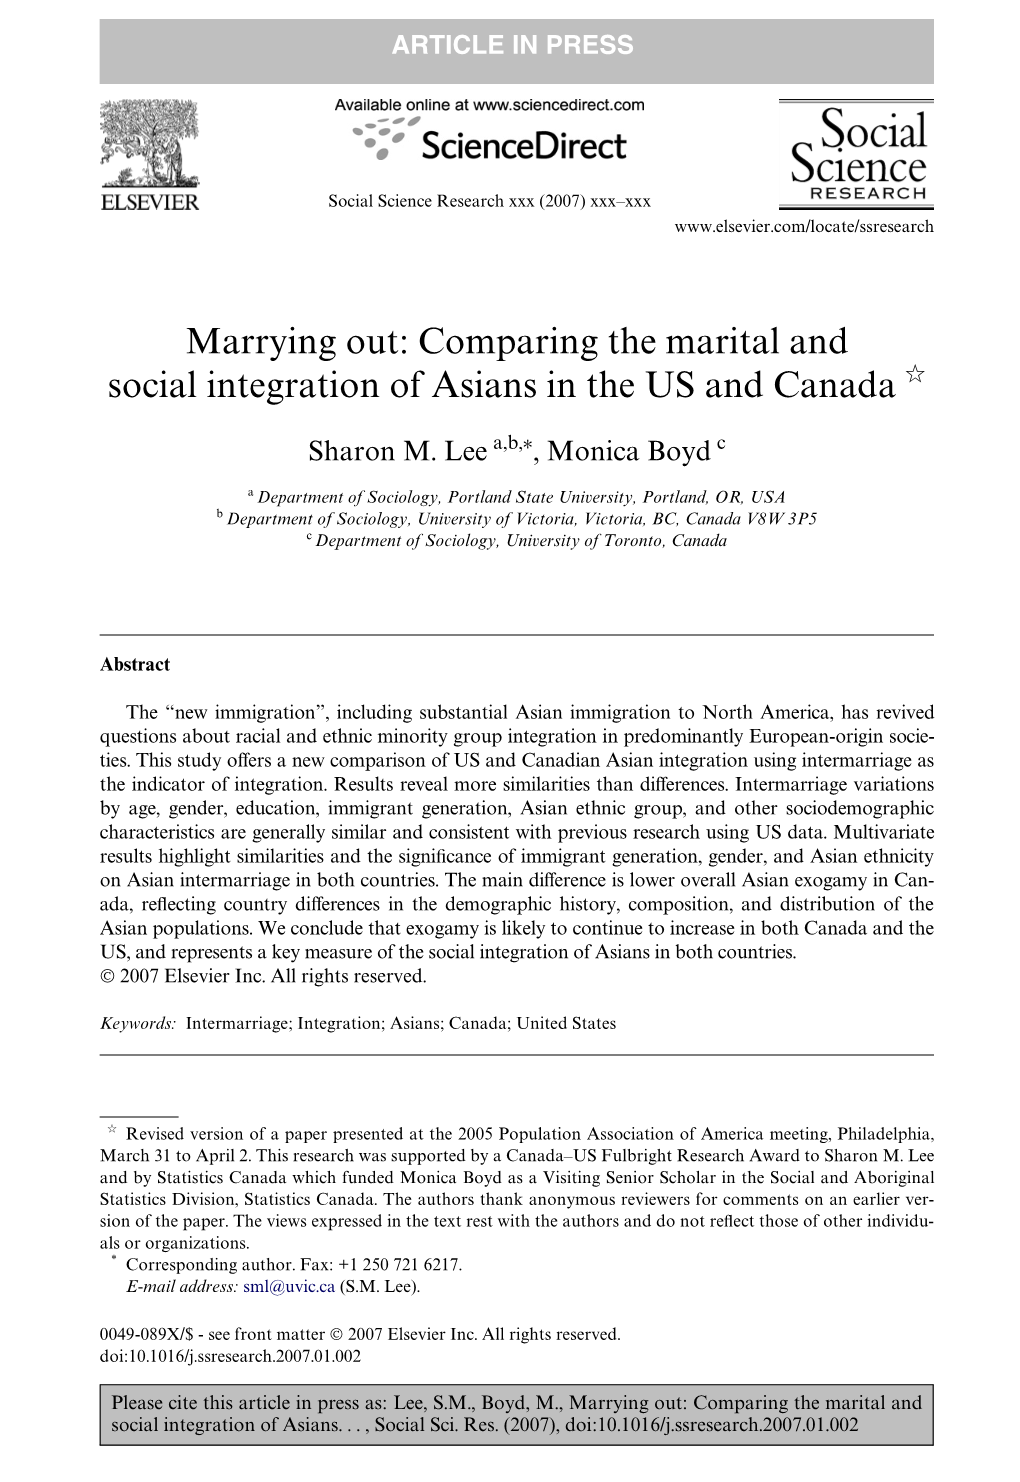 Marrying Out: Comparing the Marital and Social Integration of Asians in the US and Canada ଝ